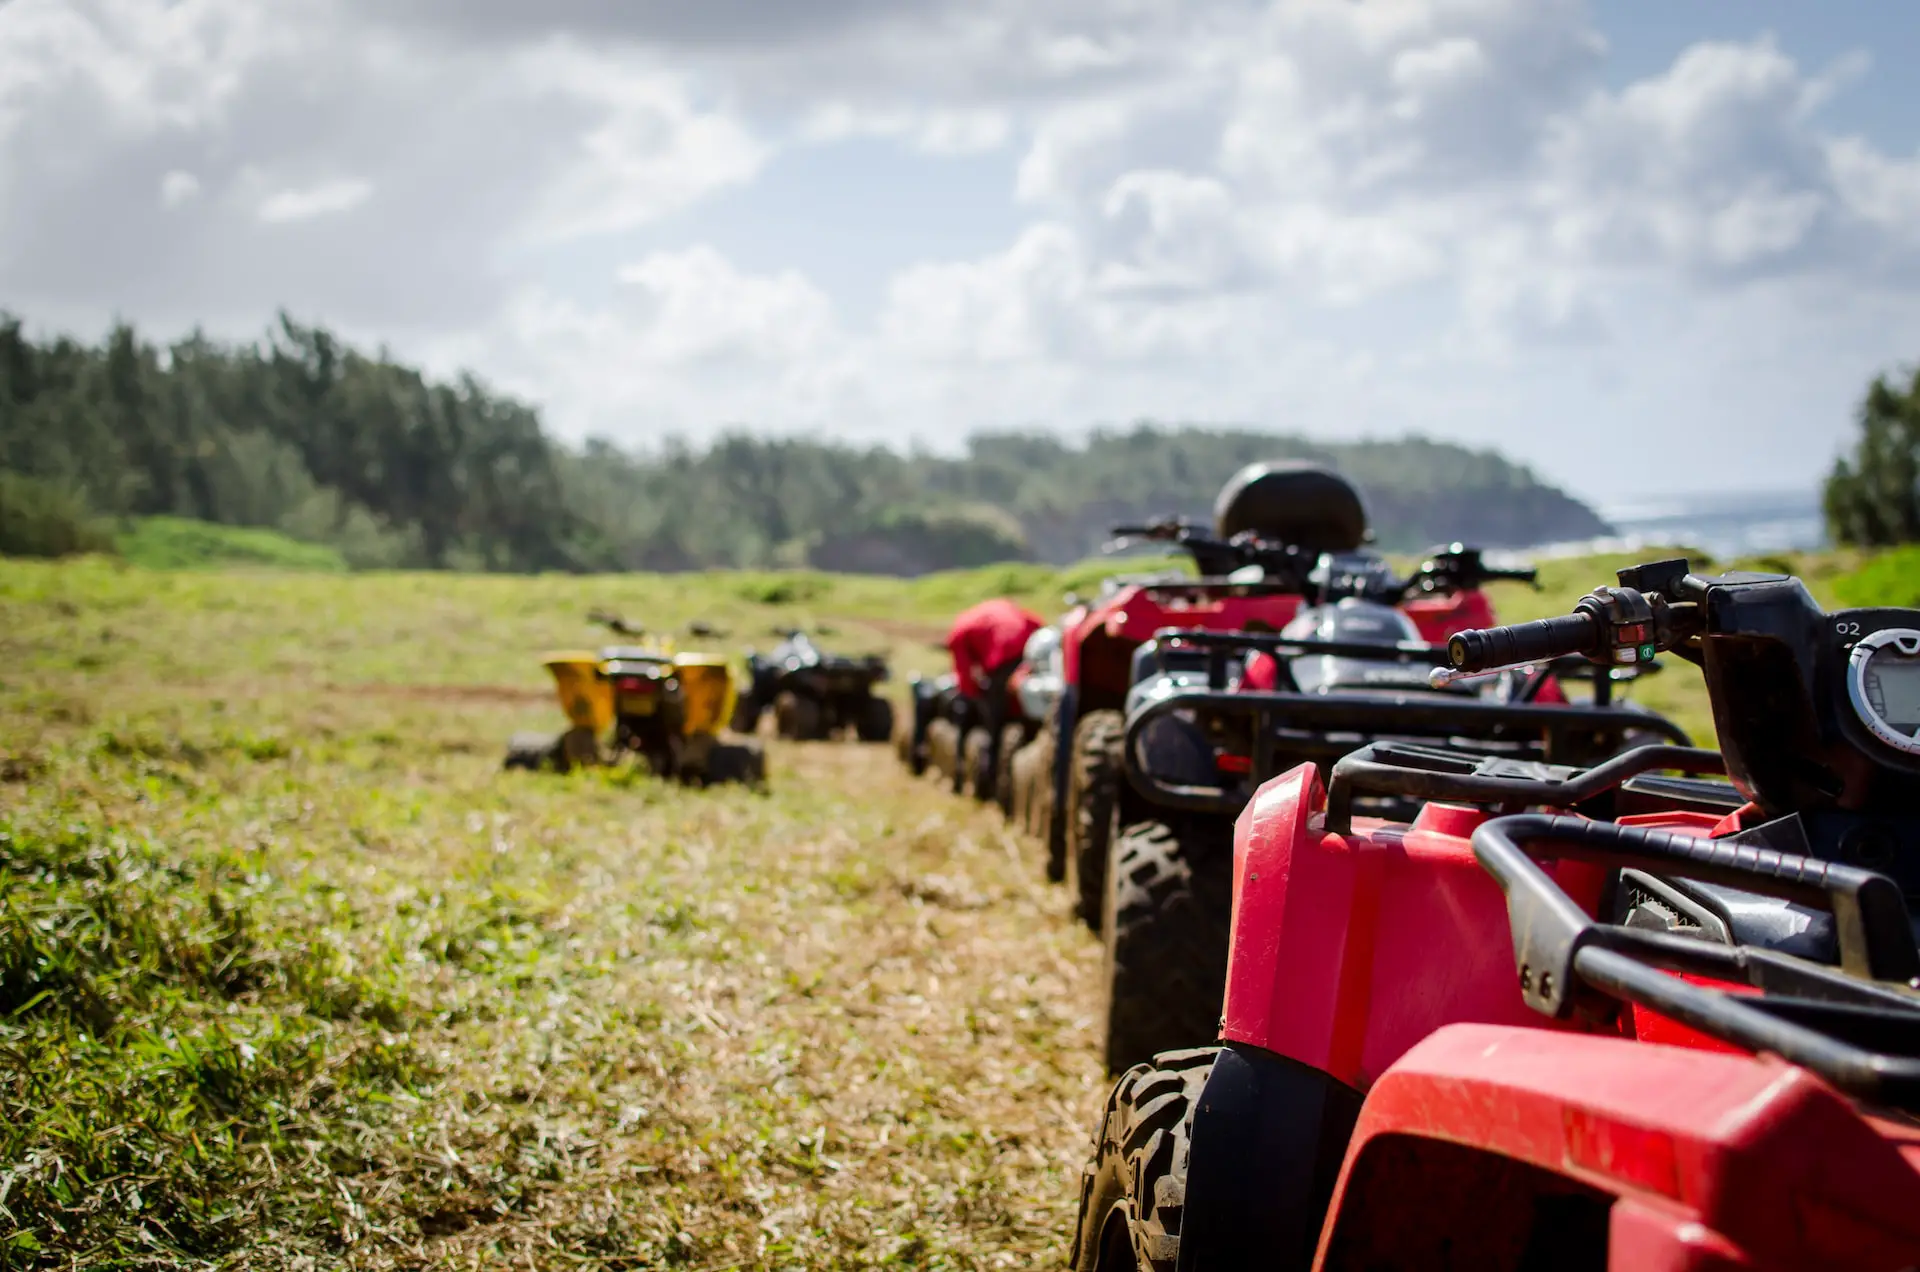 Why are used ATV so expensive?